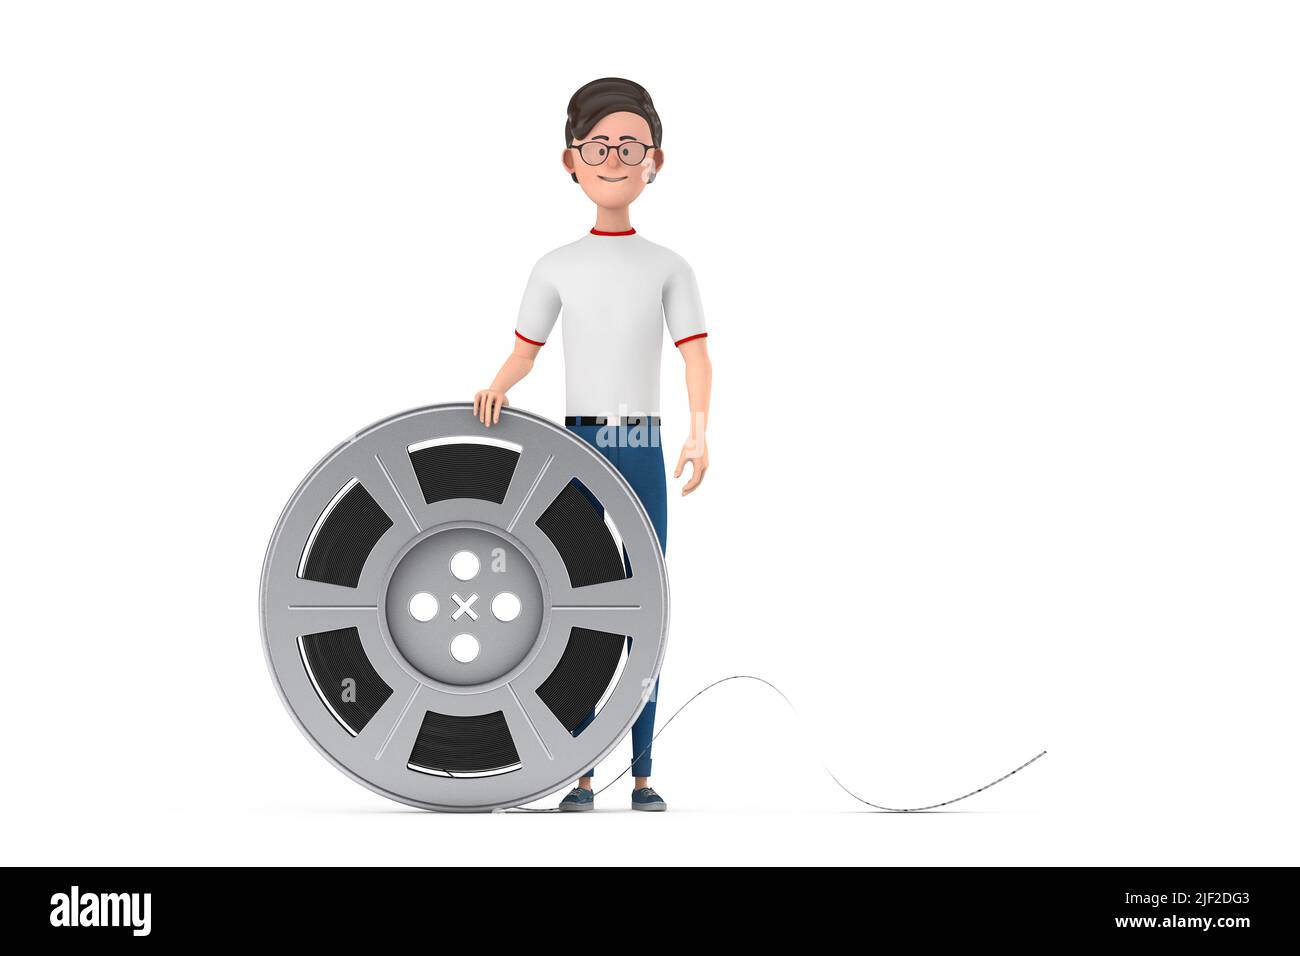 https://c8.alamy.com/comp/2JF2DG3/cartoon-character-person-man-with-film-reel-cinema-tape-on-a-white-background-3d-rendering-2JF2DG3.jpg